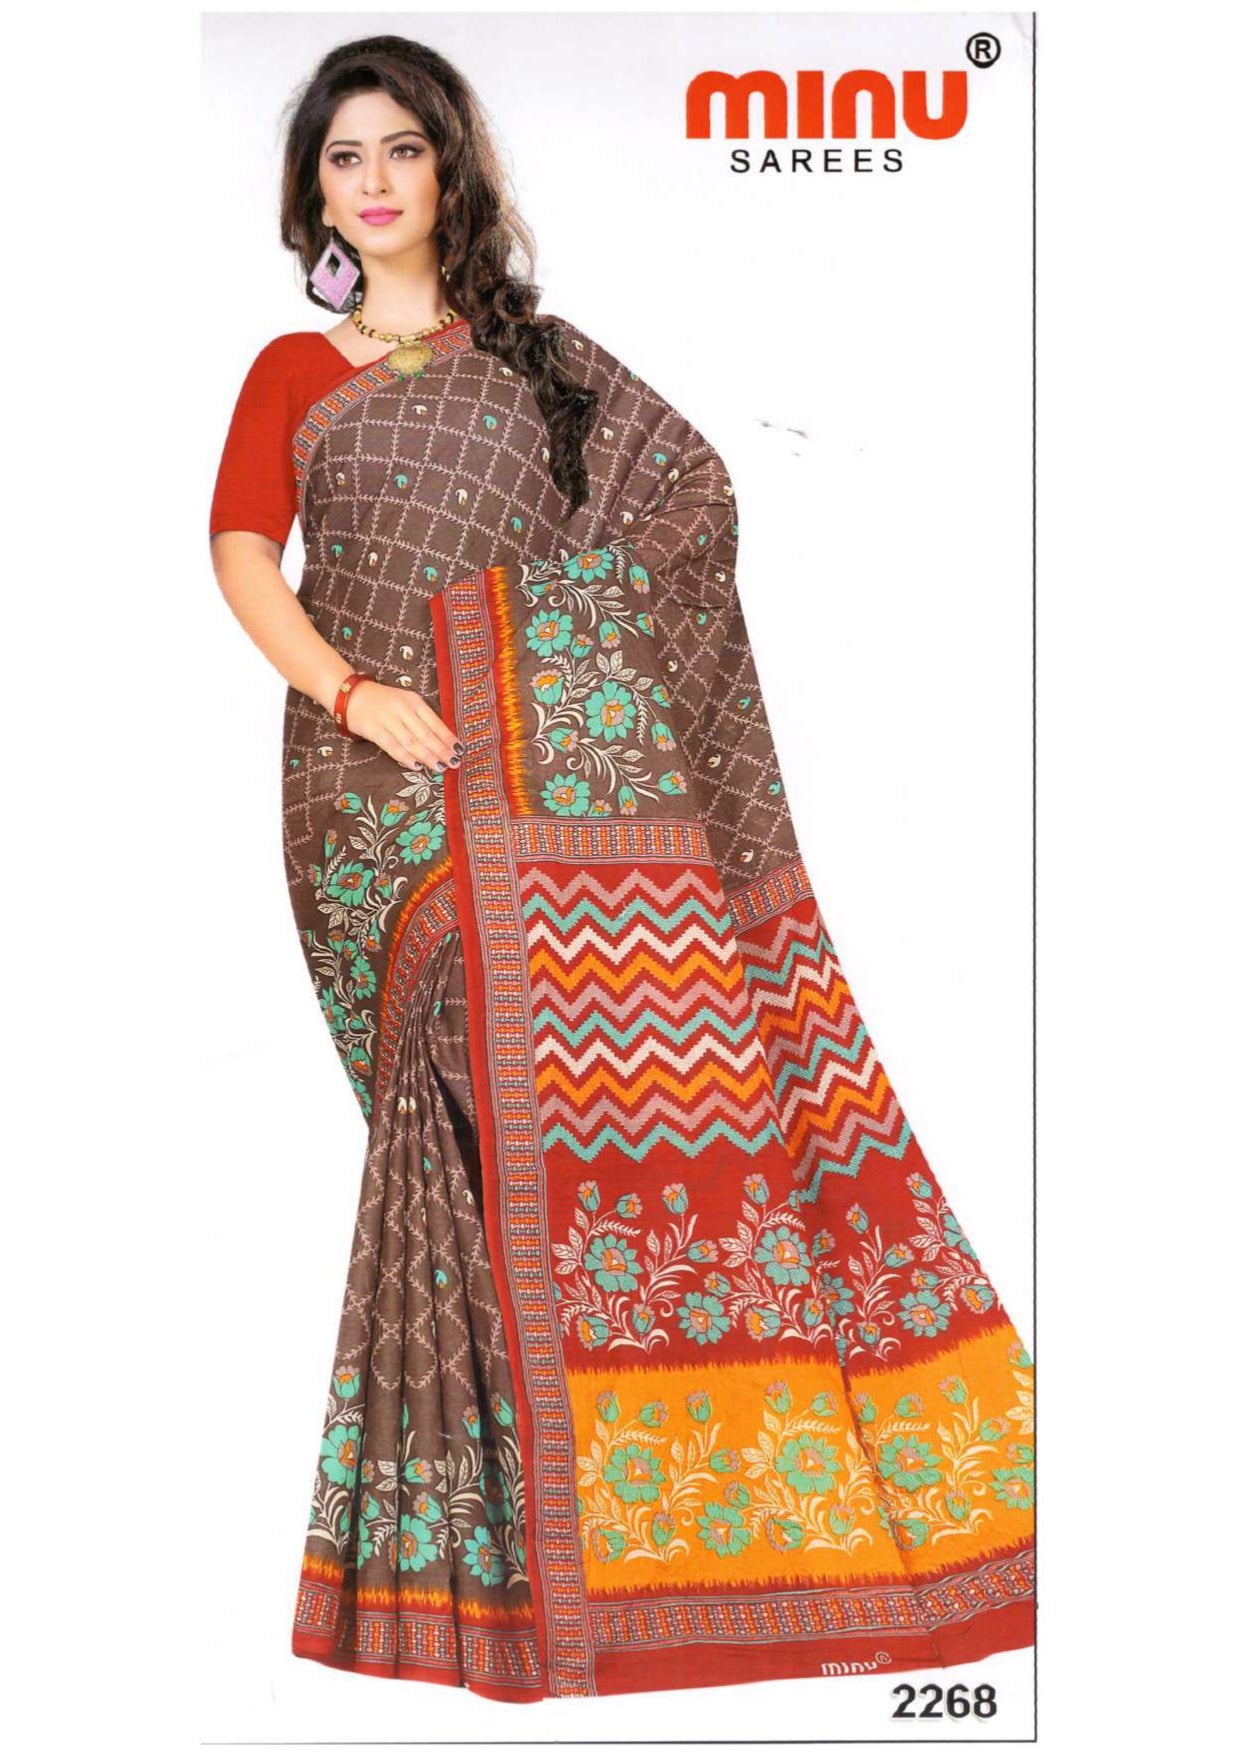 Woman in printed saree with modern designing online 